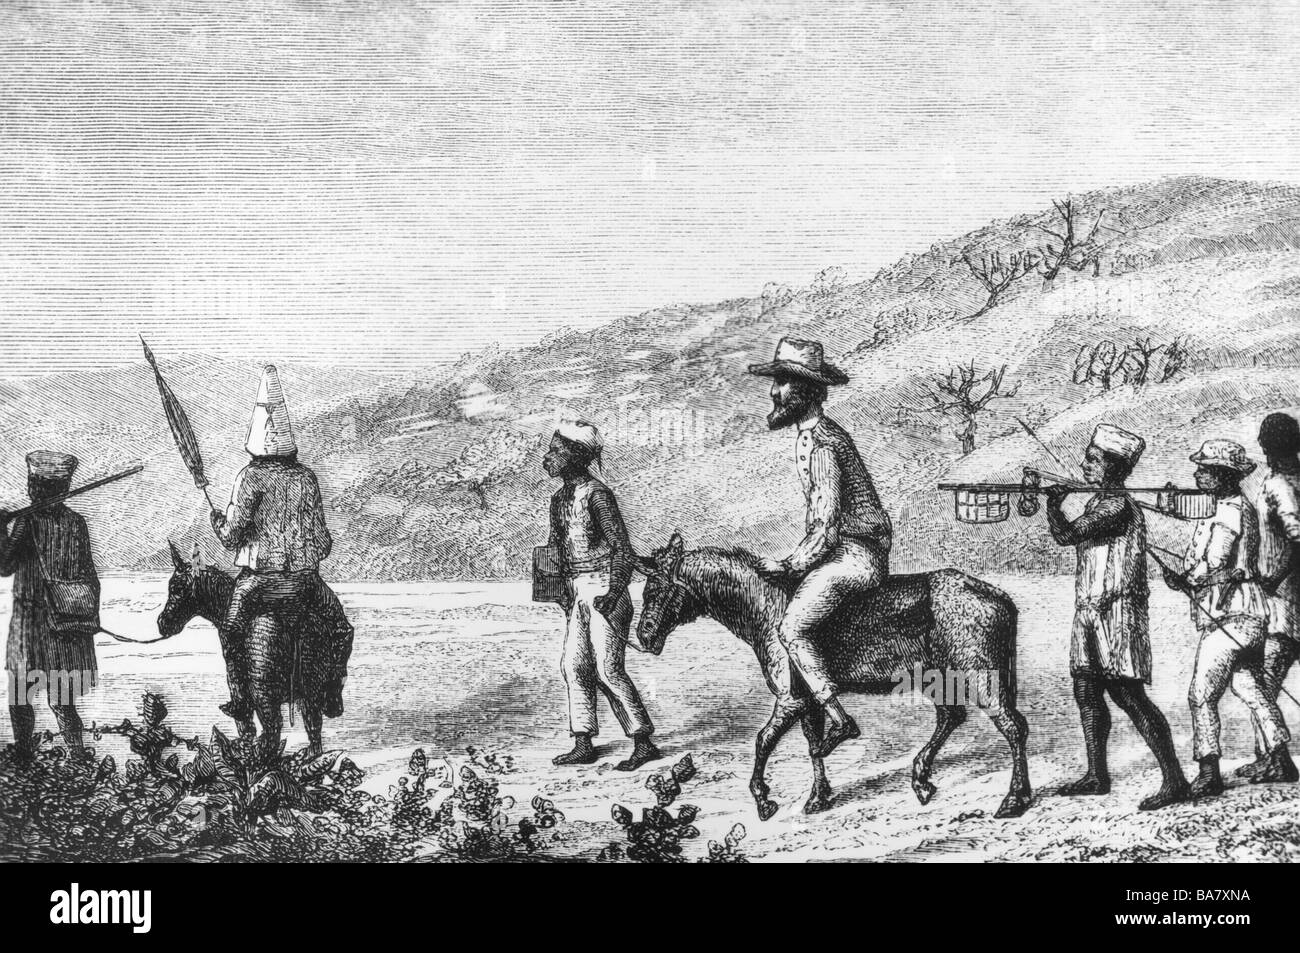 Burton, Richard Francis, 19.3.1821 - 20.10.1890, British explorer, full length, with his companions on an expedition, South Africa, wood engraving, 19th century, Stock Photo